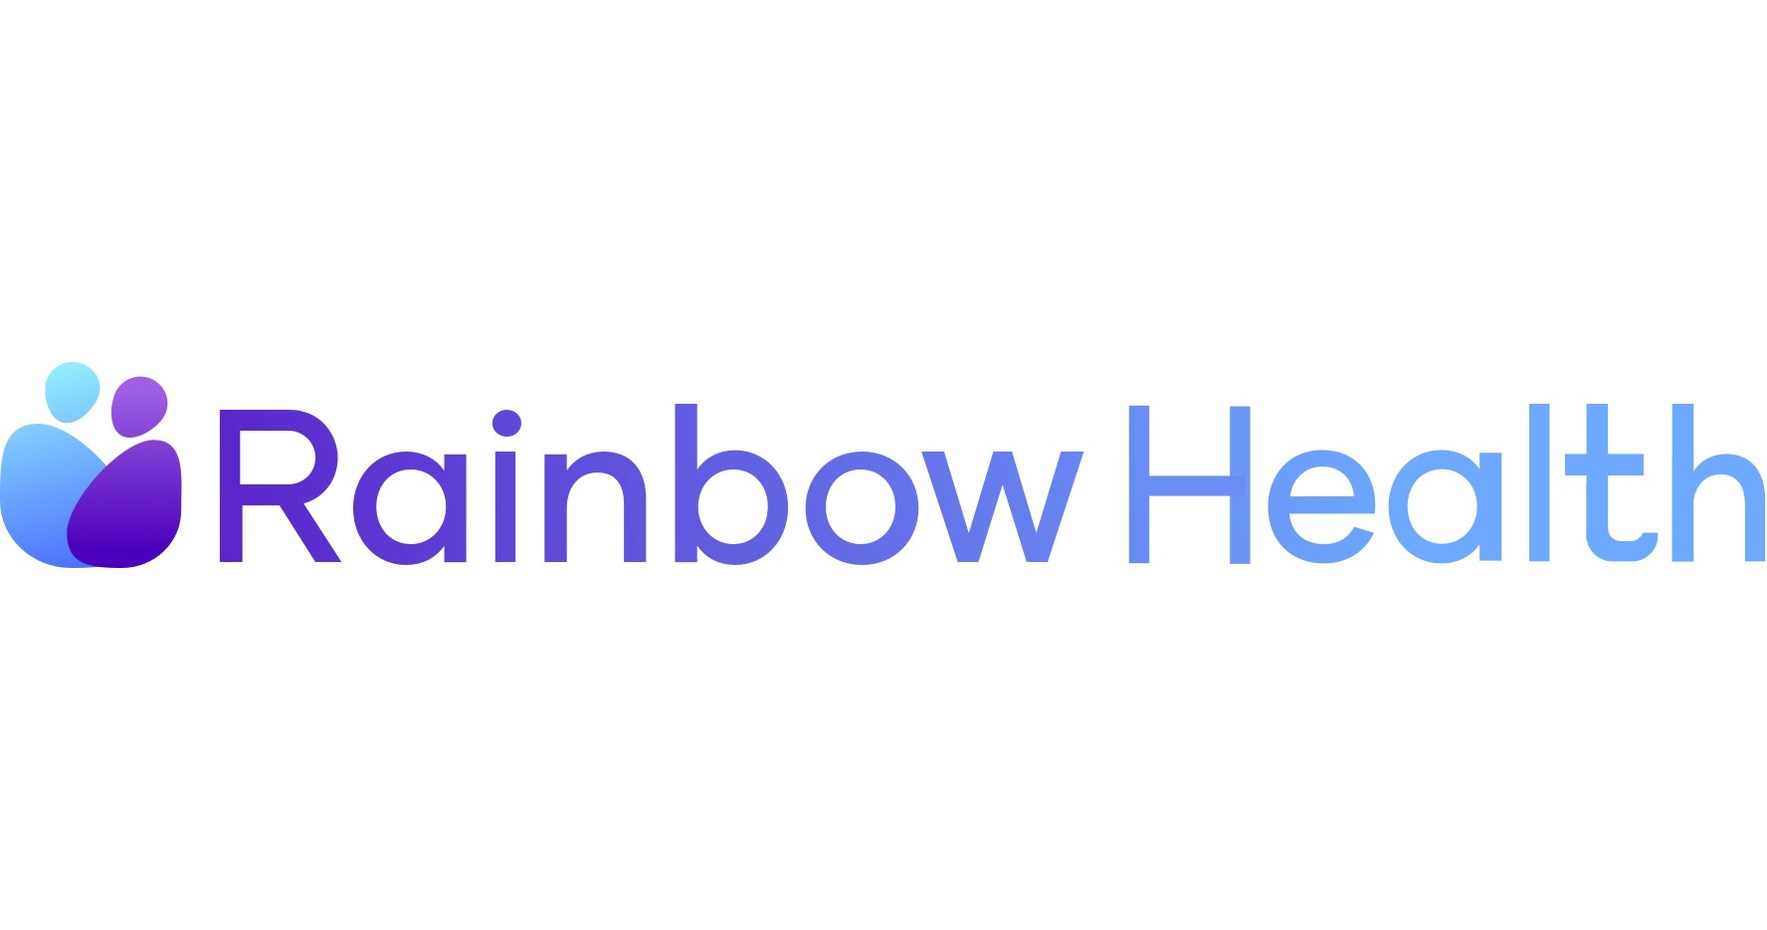 Rainbow Health Launches Technology Platform to Extend Services for Hospital-at-Home Programs